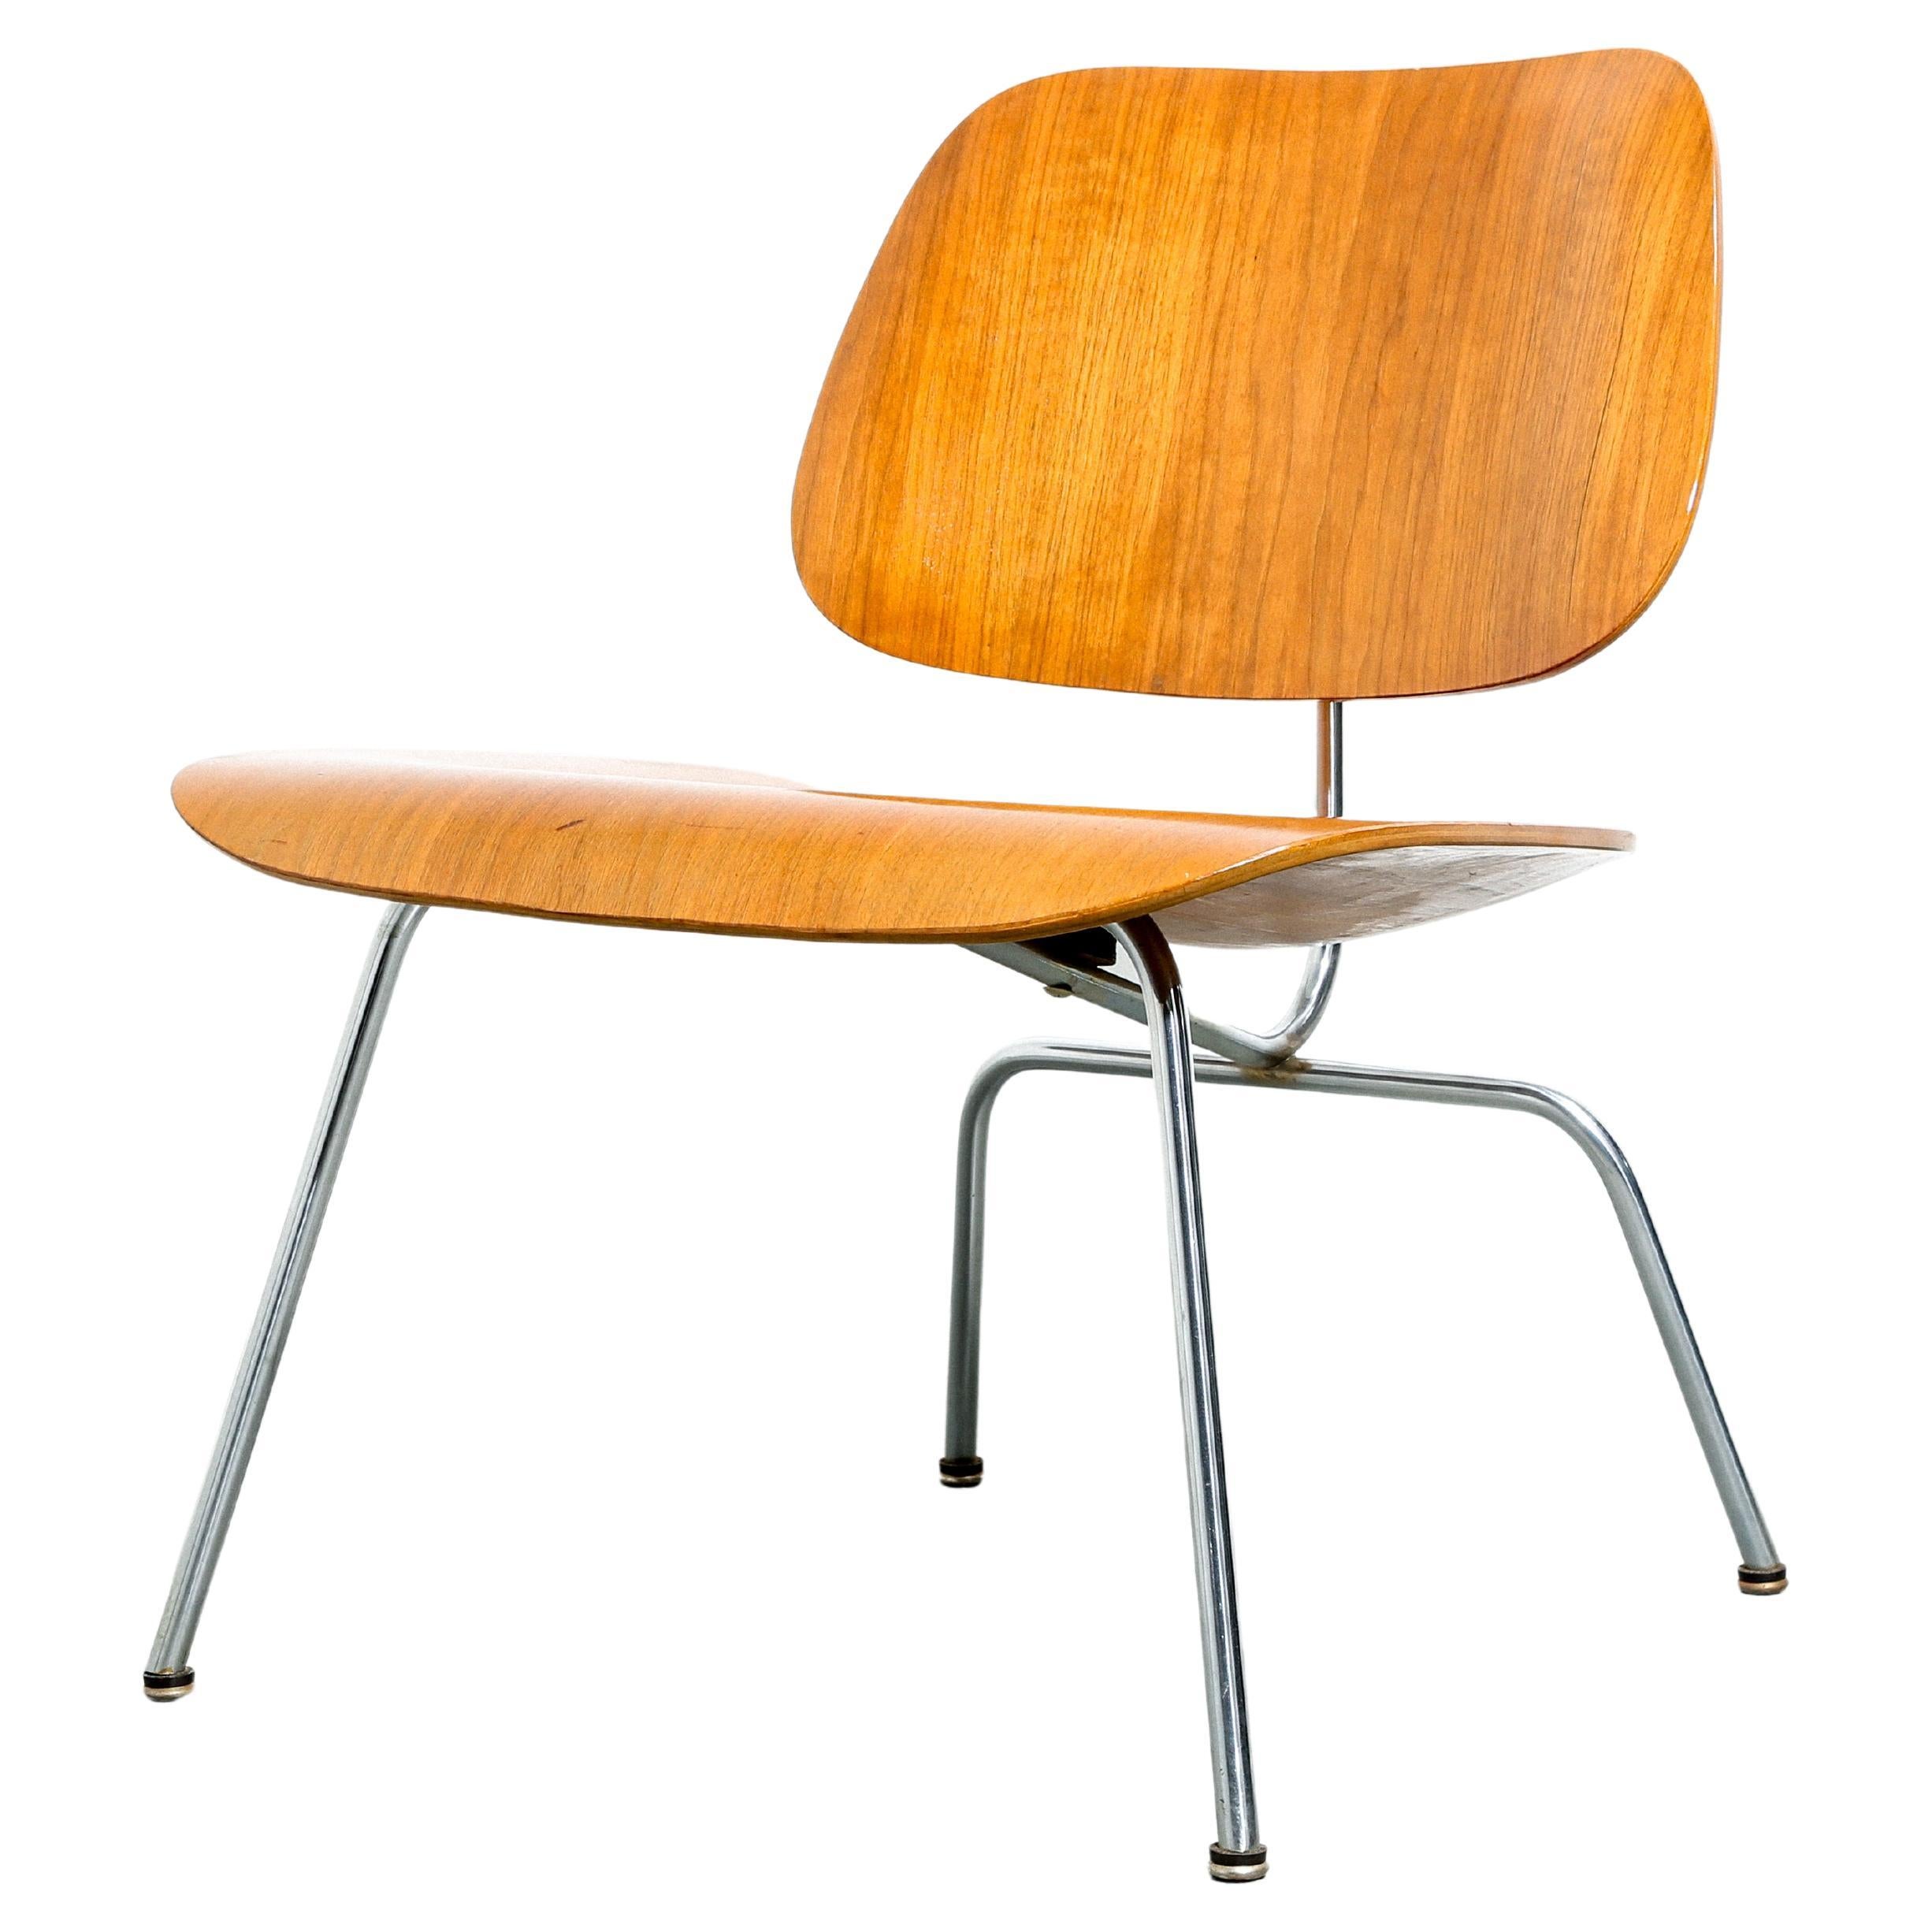 Eames Lcm Chair (2Nd Generation)